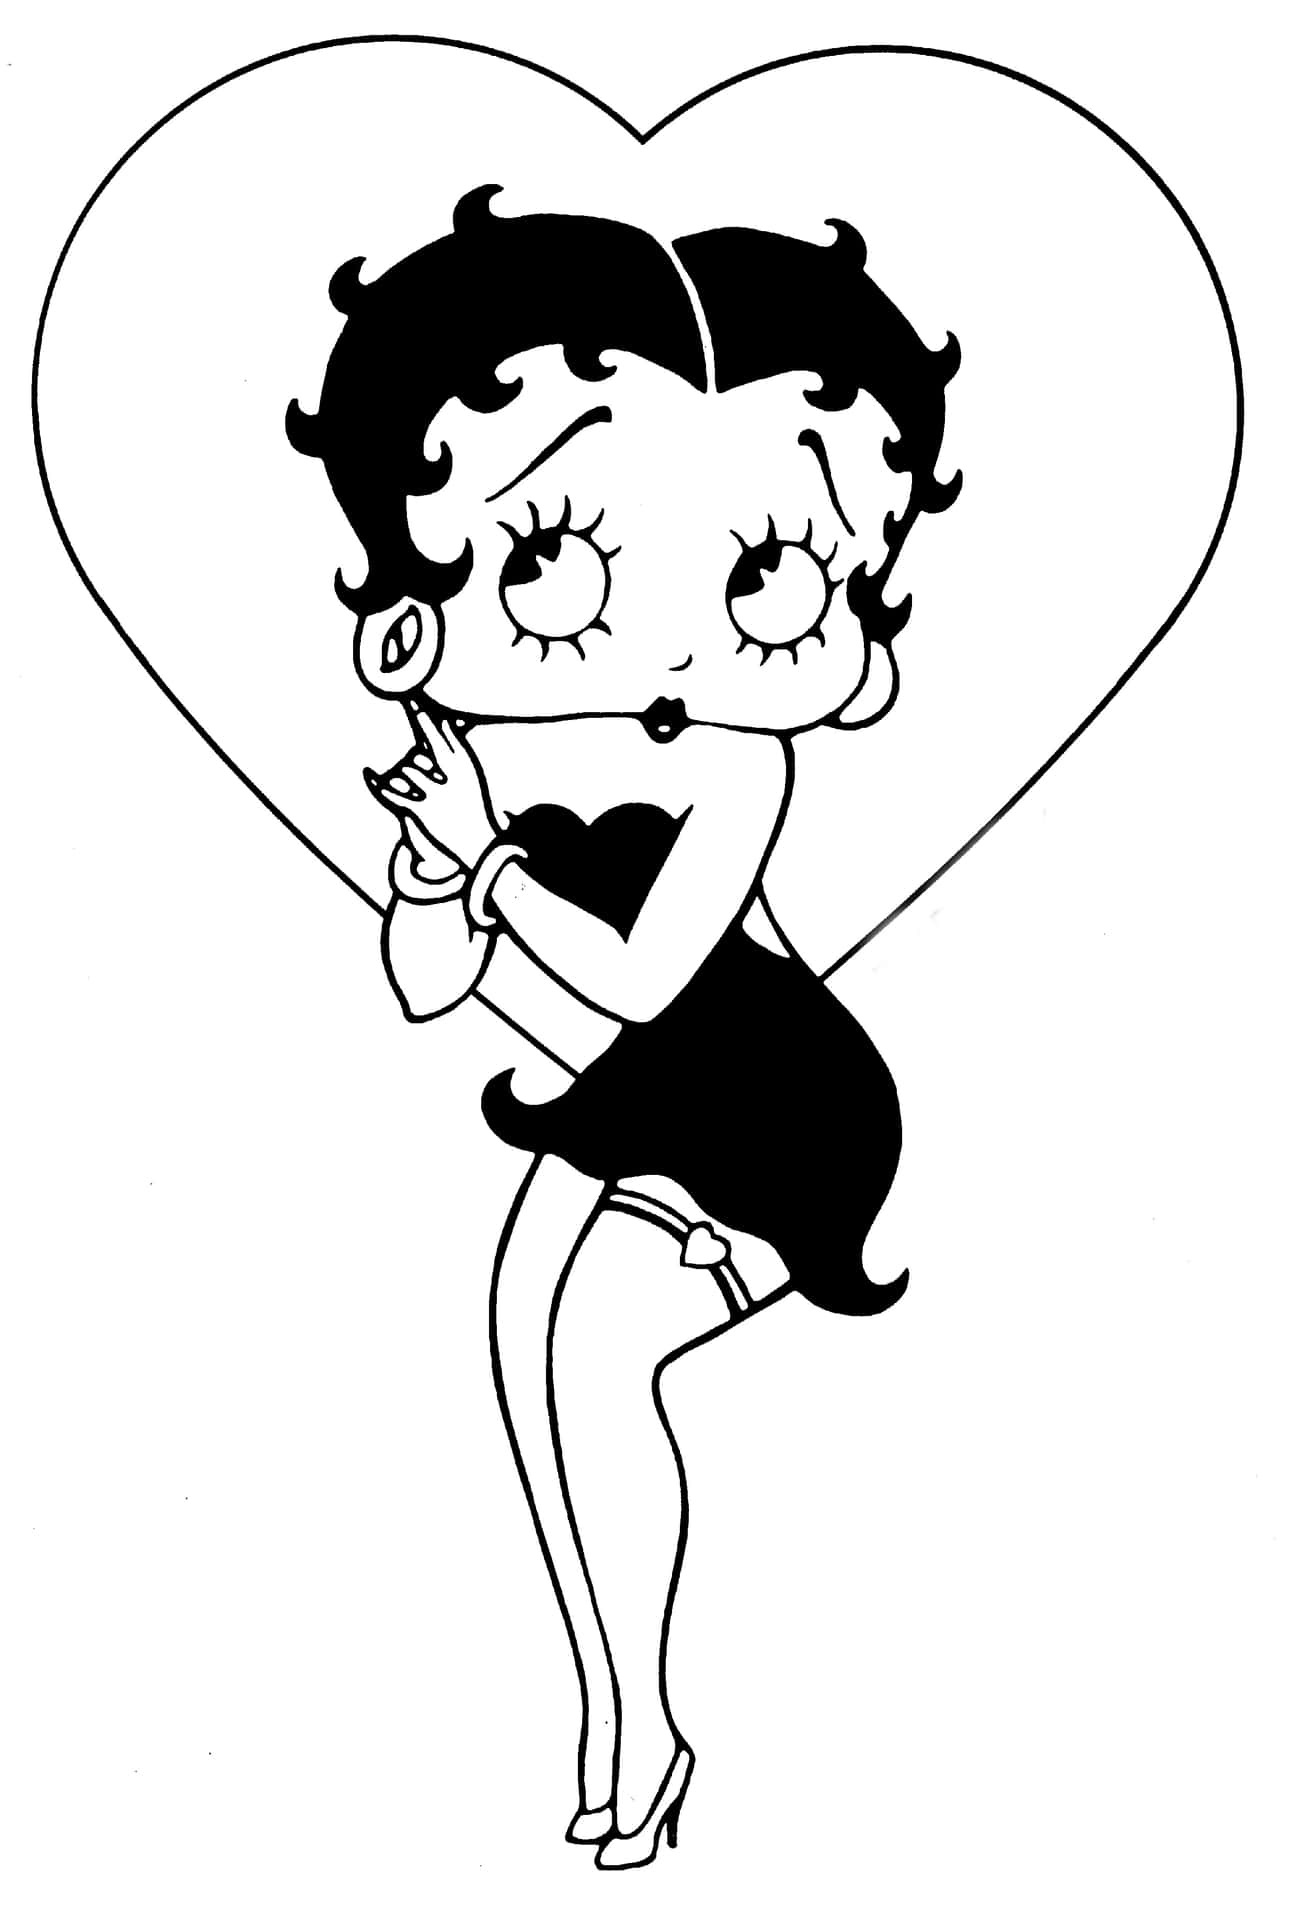 Betty Boop Brings Life to Any Occasion